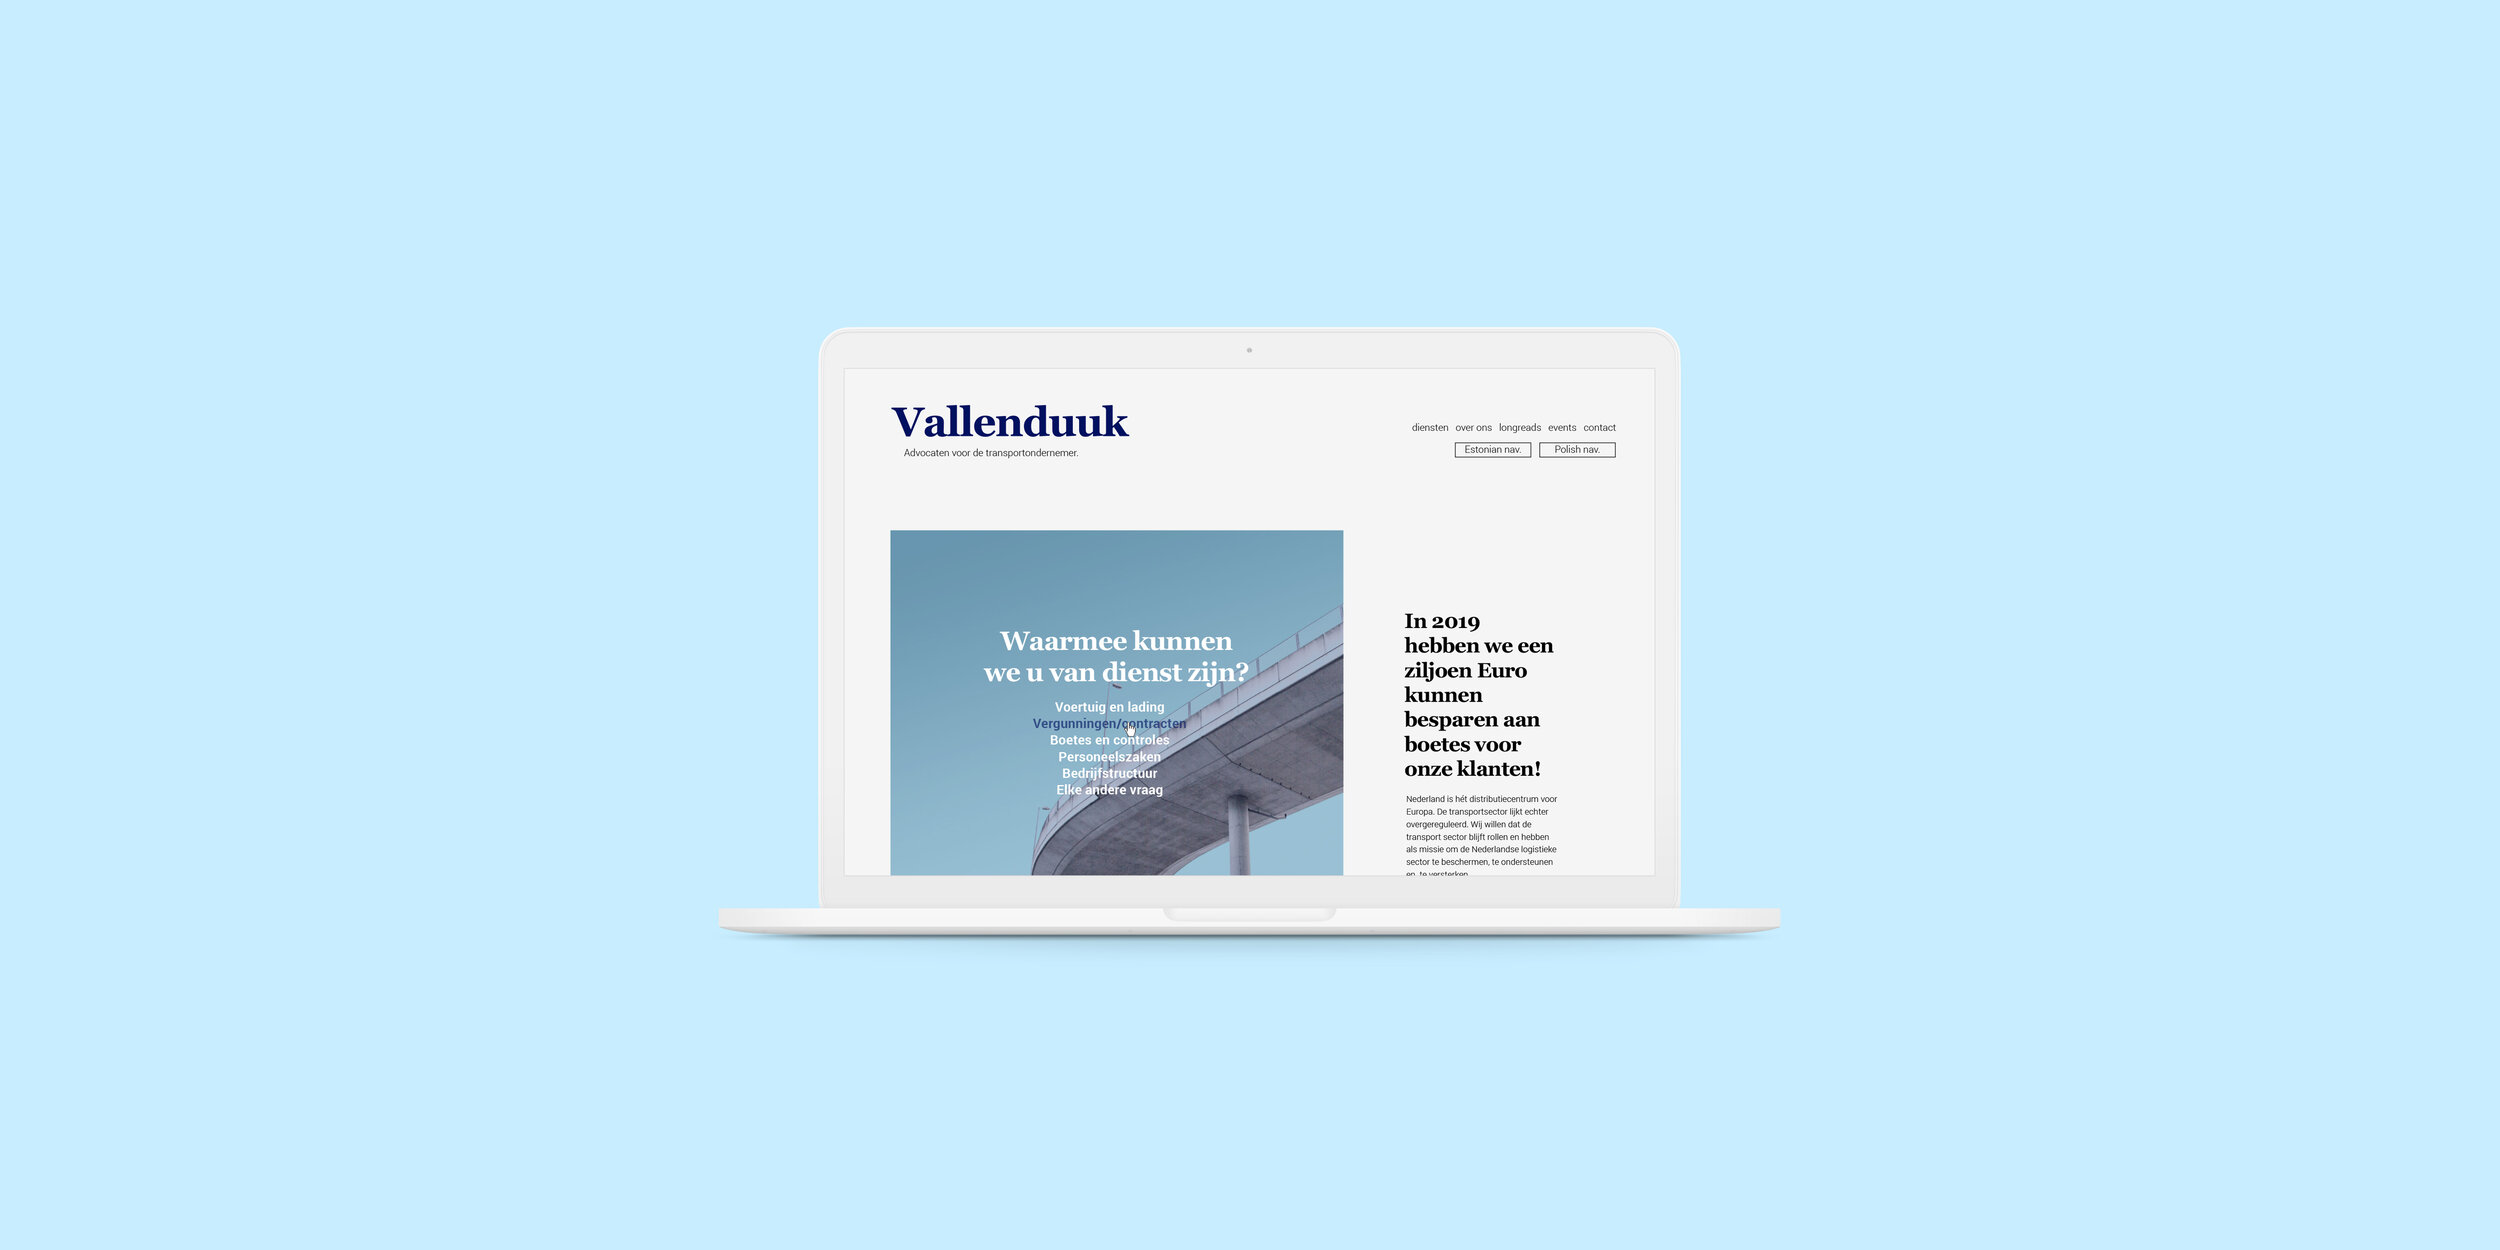  identity and site for Vallenduuk Advocaten, specializing in transport. as you can see. 